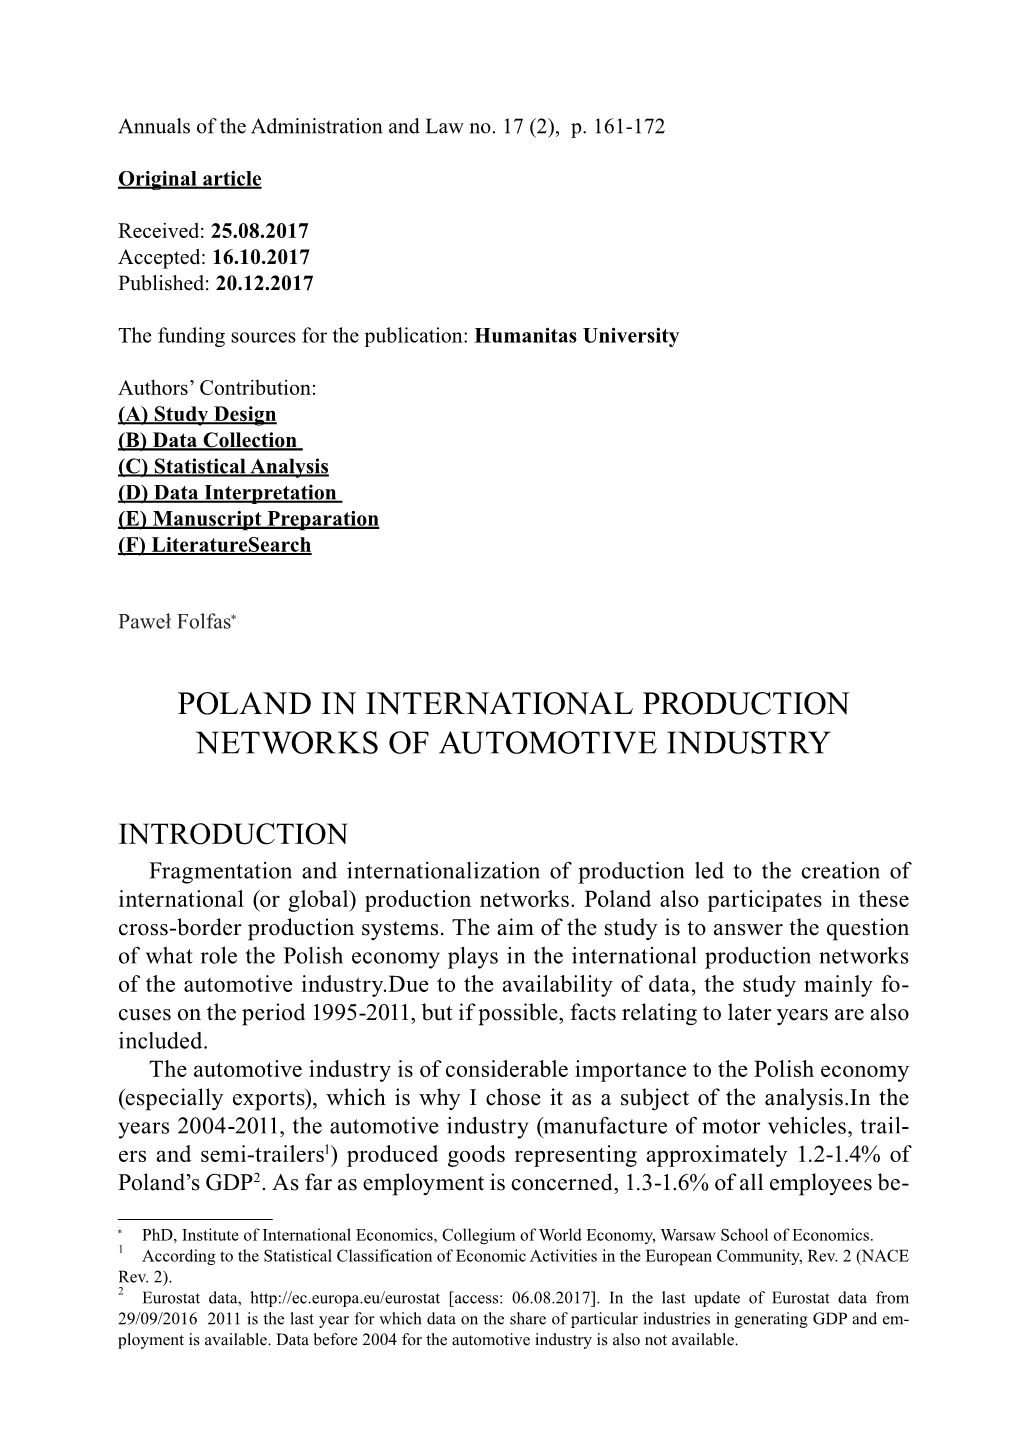 Poland in International Production Networks of Automotive Industry